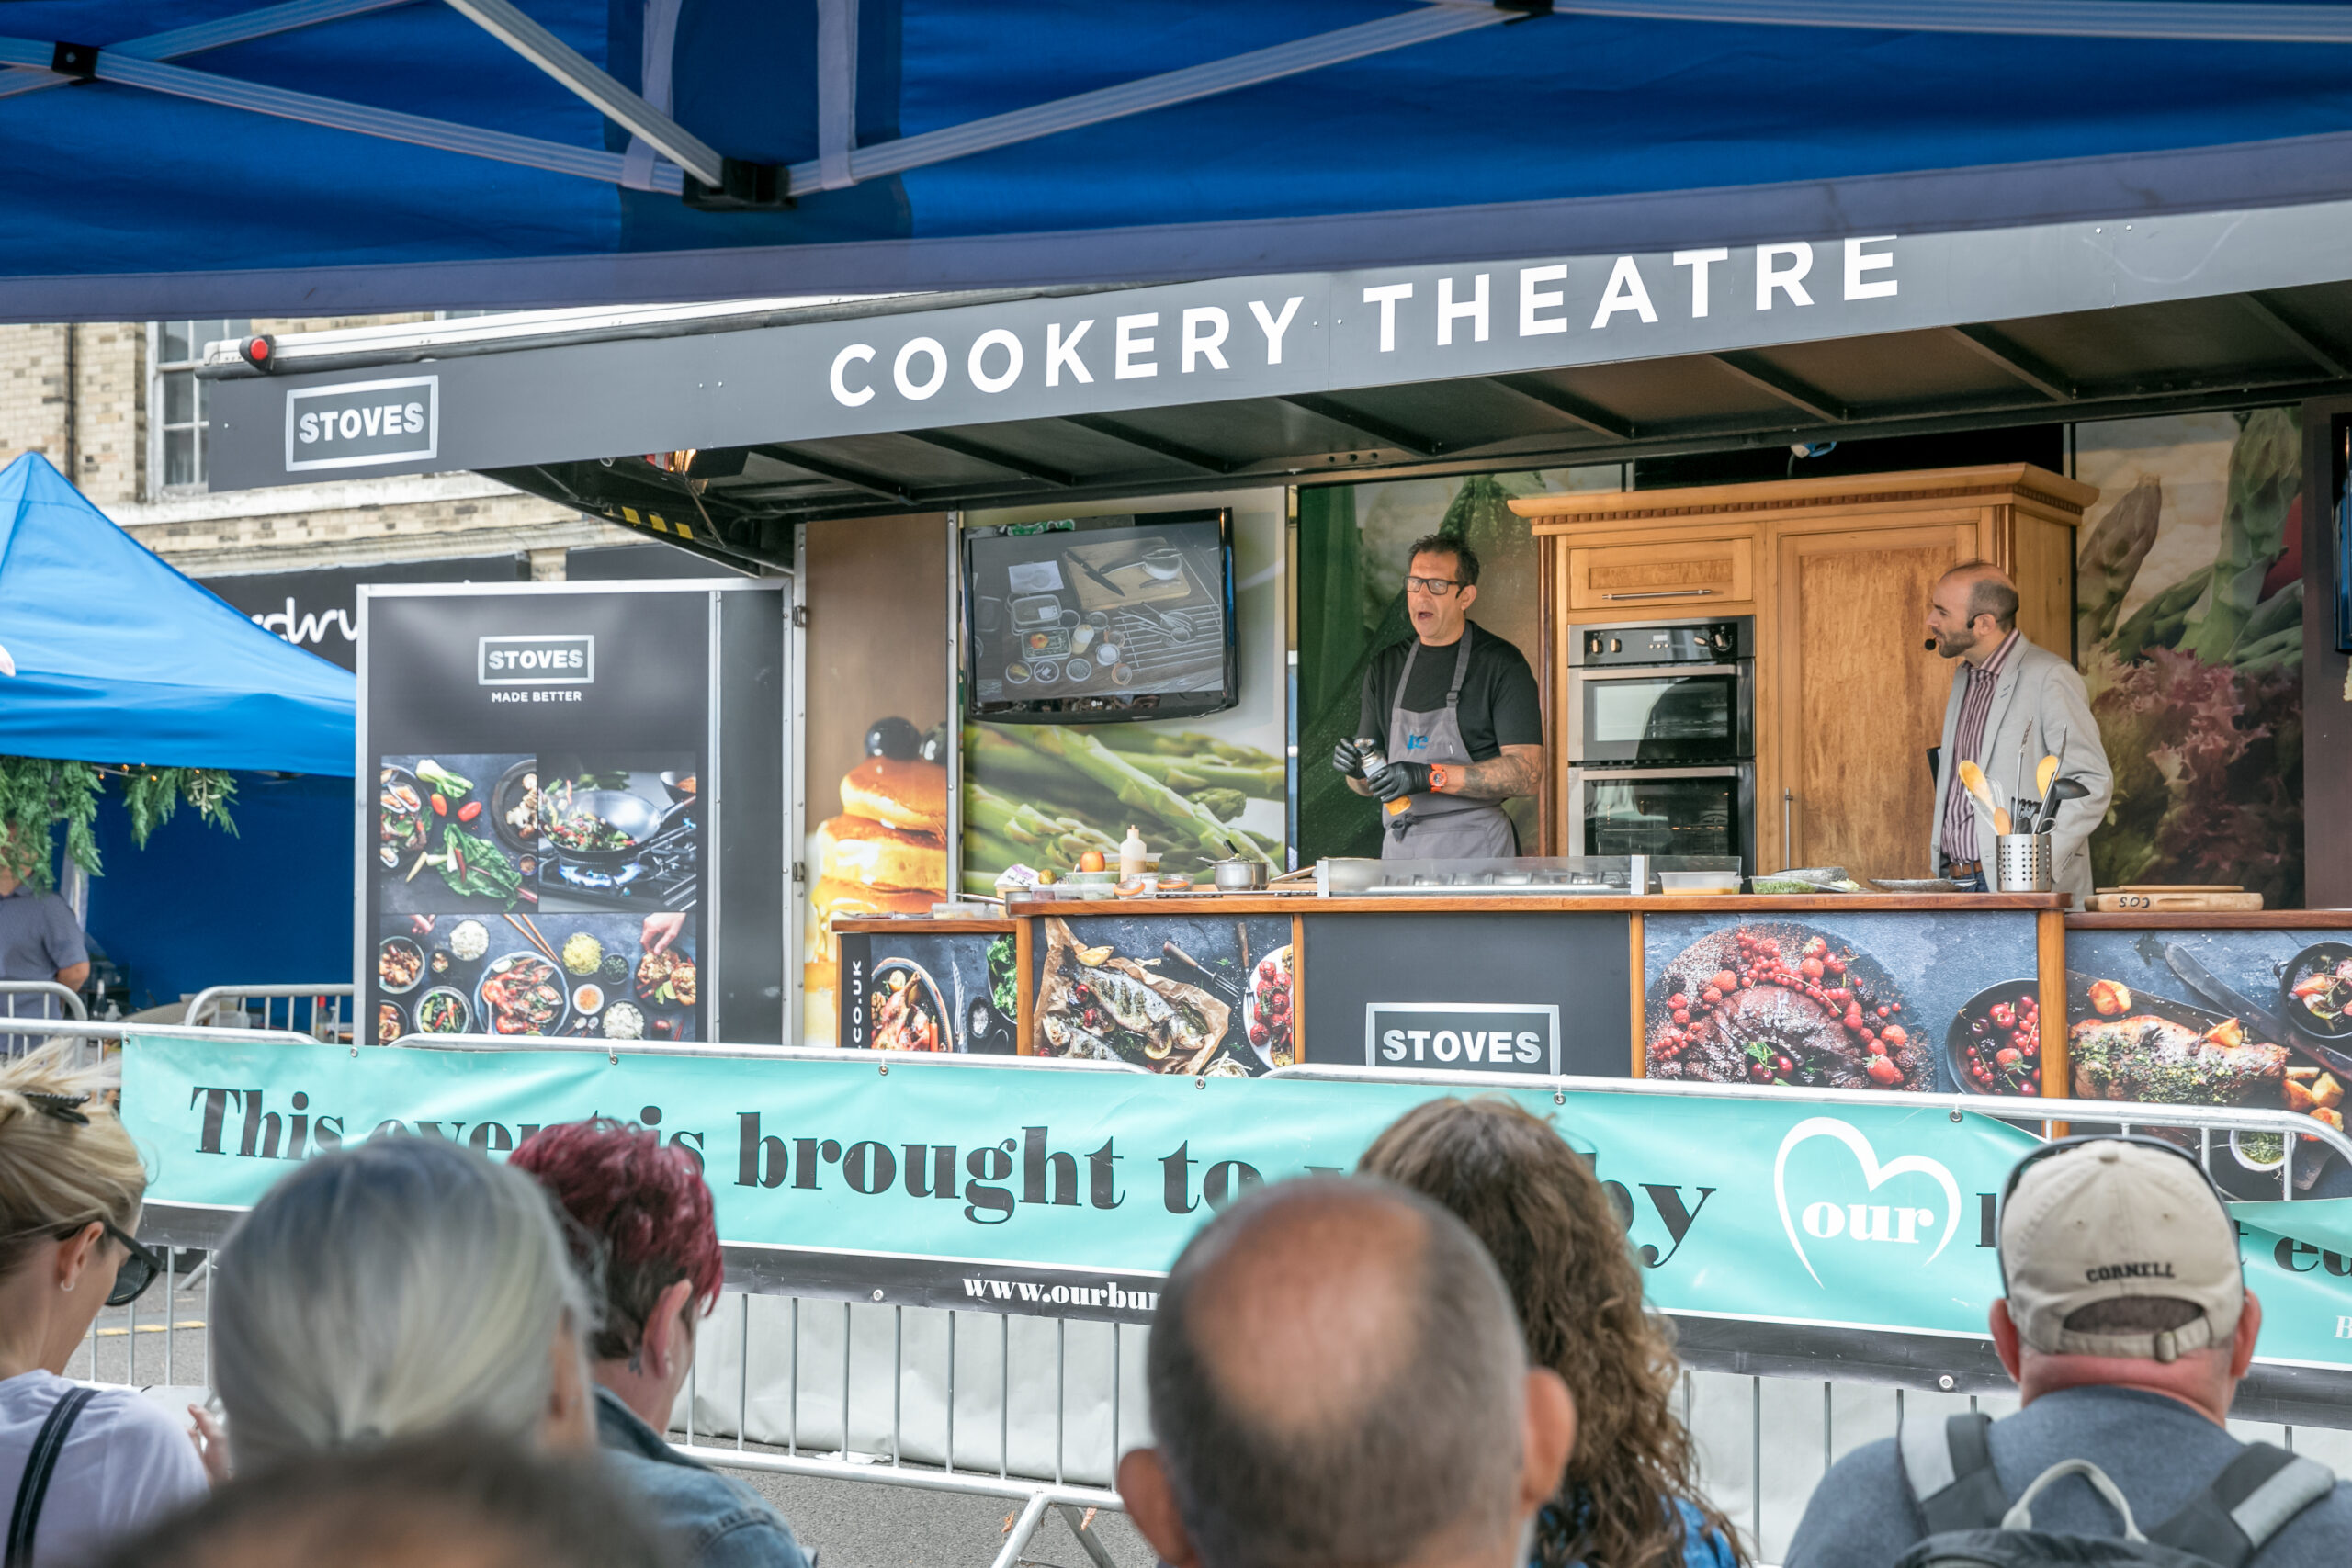 Our Bury St Edmunds promises mouth-watering Festival